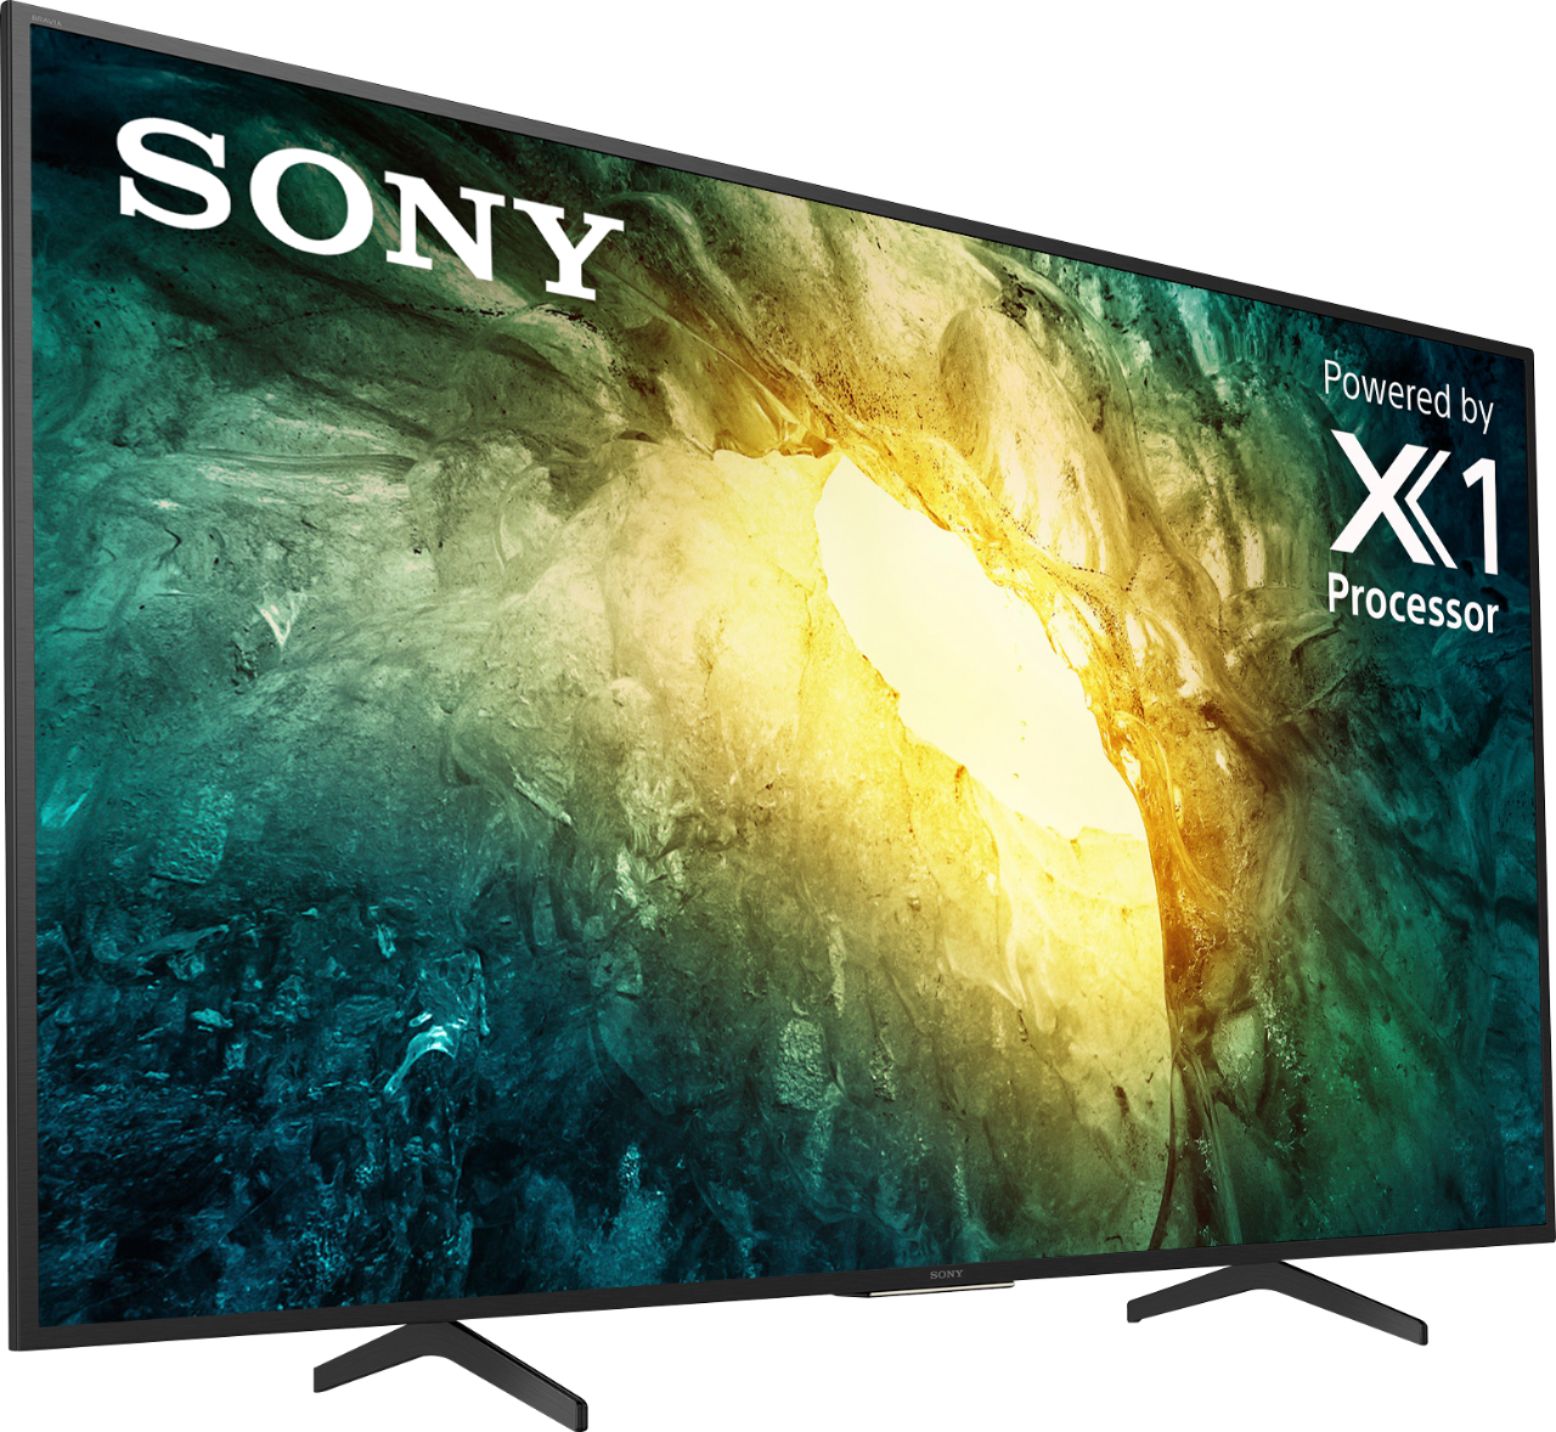 Best Buy: Sony 55" Class X750H LED 4K Smart Android KD55X750H